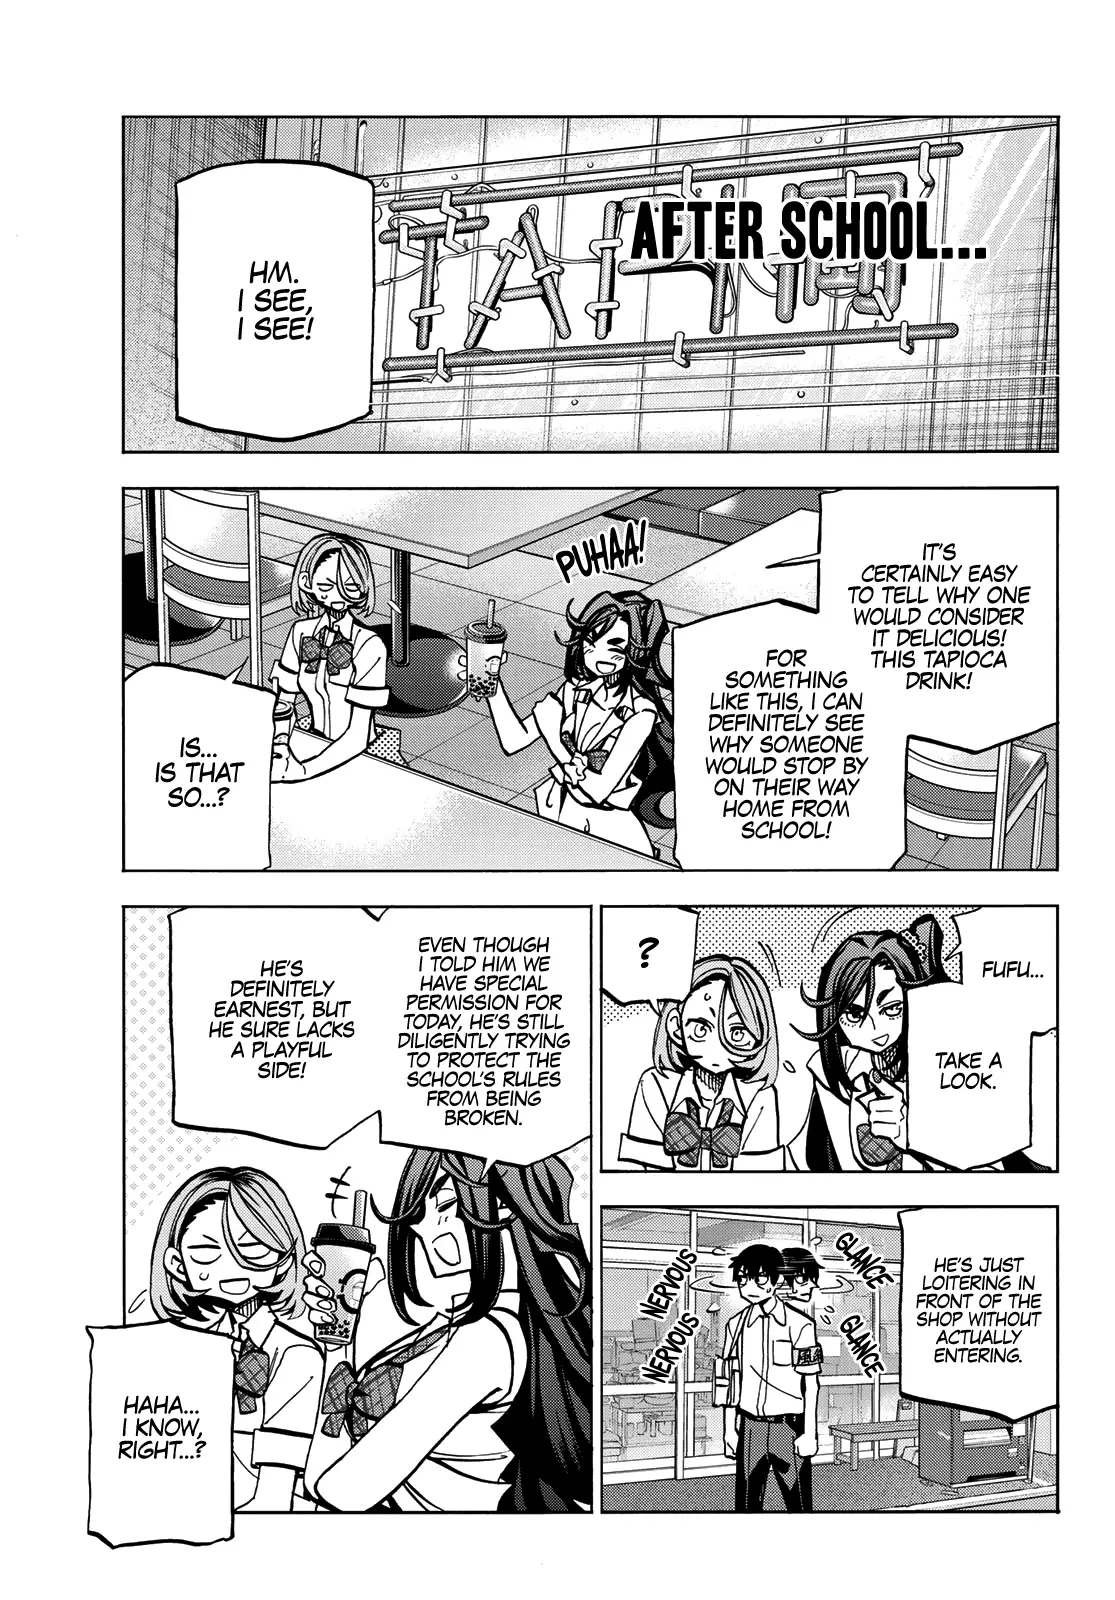 The Story Between A Dumb Prefect And A High School Girl With An Inappropriate Skirt Length - 7 page 23